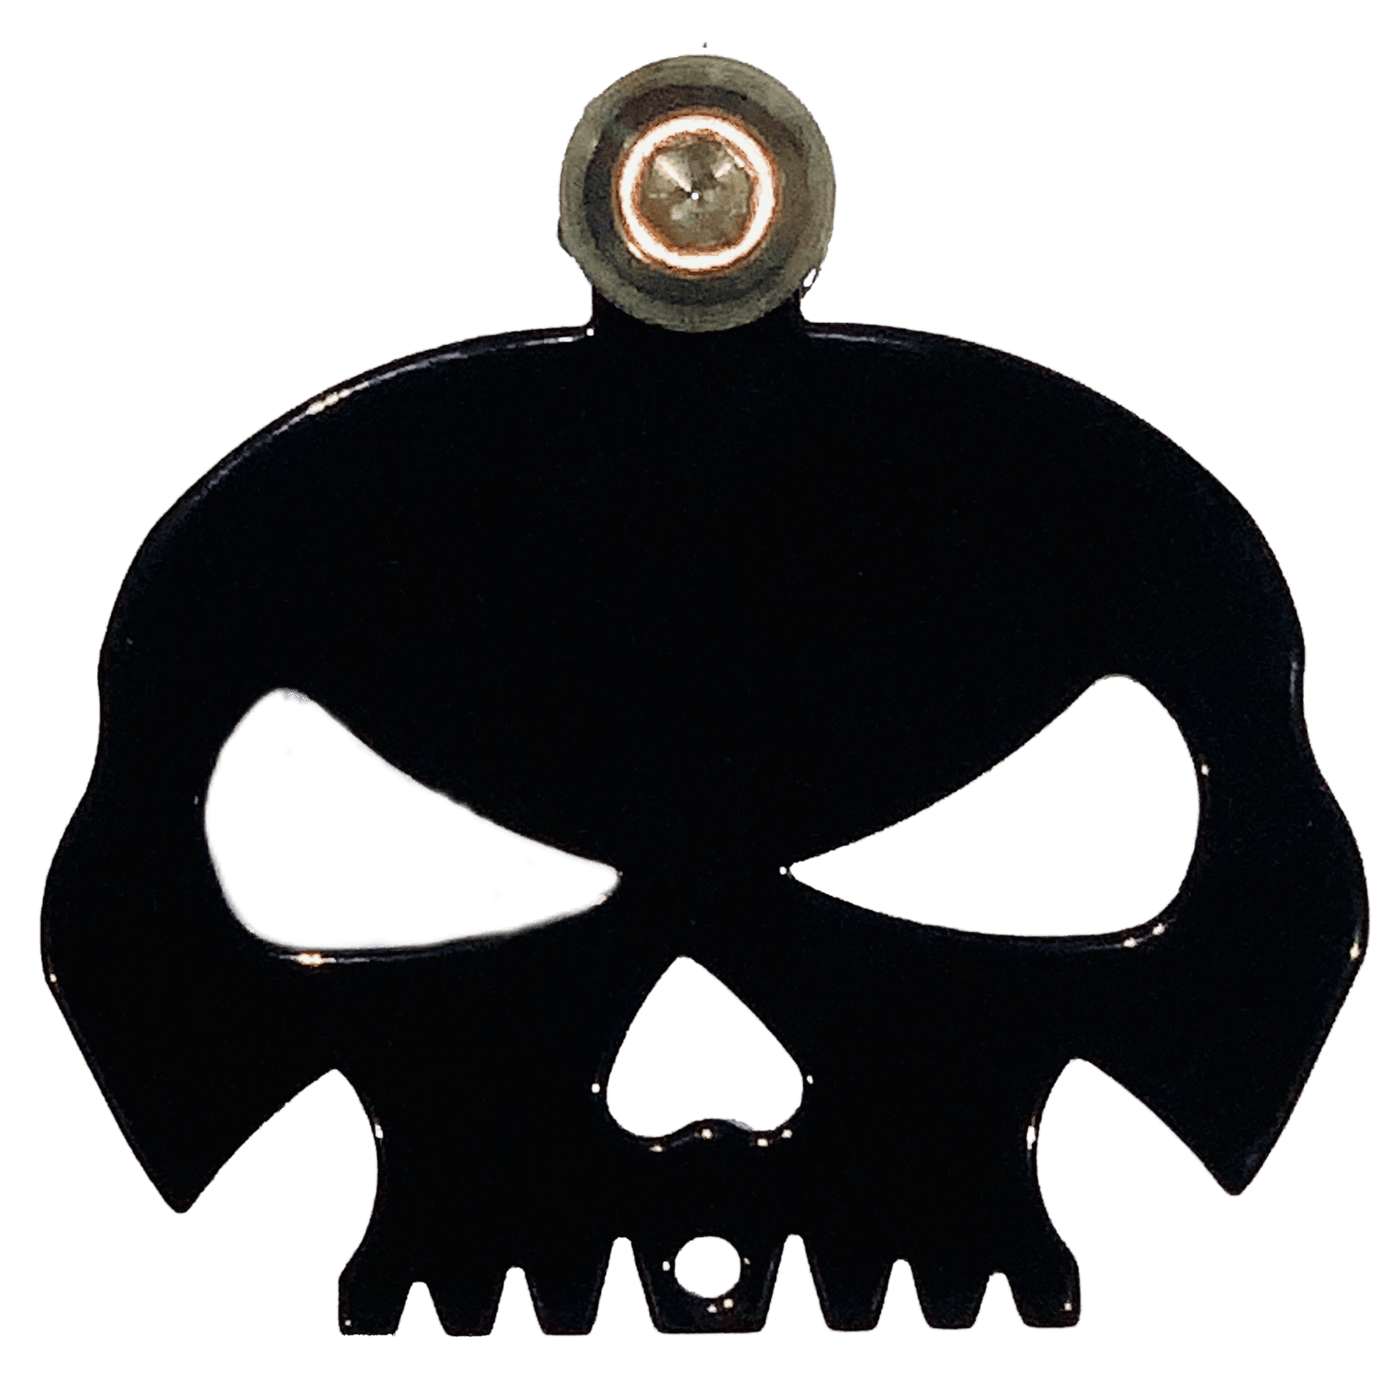 Gloss Black Skull Bell Hanger / Mount for Motorcycle Harley Bolt & Ring Included - Moto Life Products